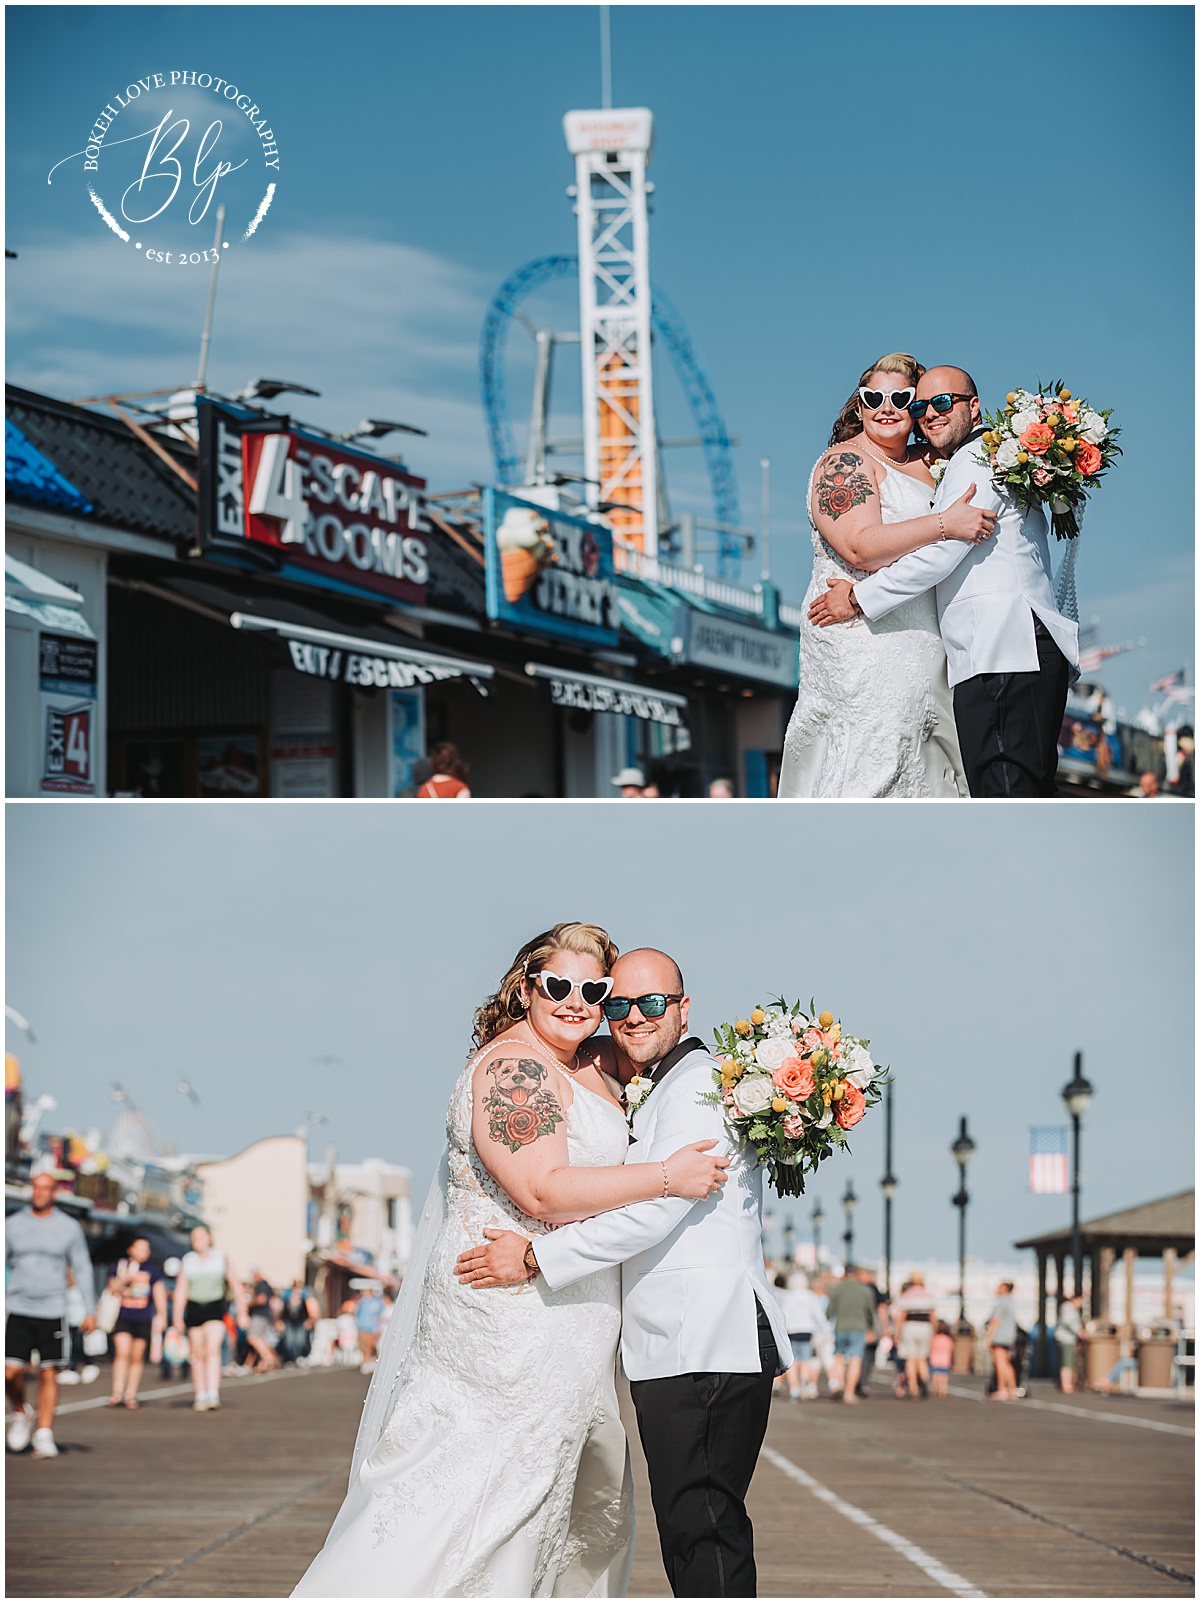 Photography by Bokeh Love Photography, bride and groom portraits at the Flanders Hotel in Ocean City, amusement park photos, wedding photos at the boardwalk at castaway cove